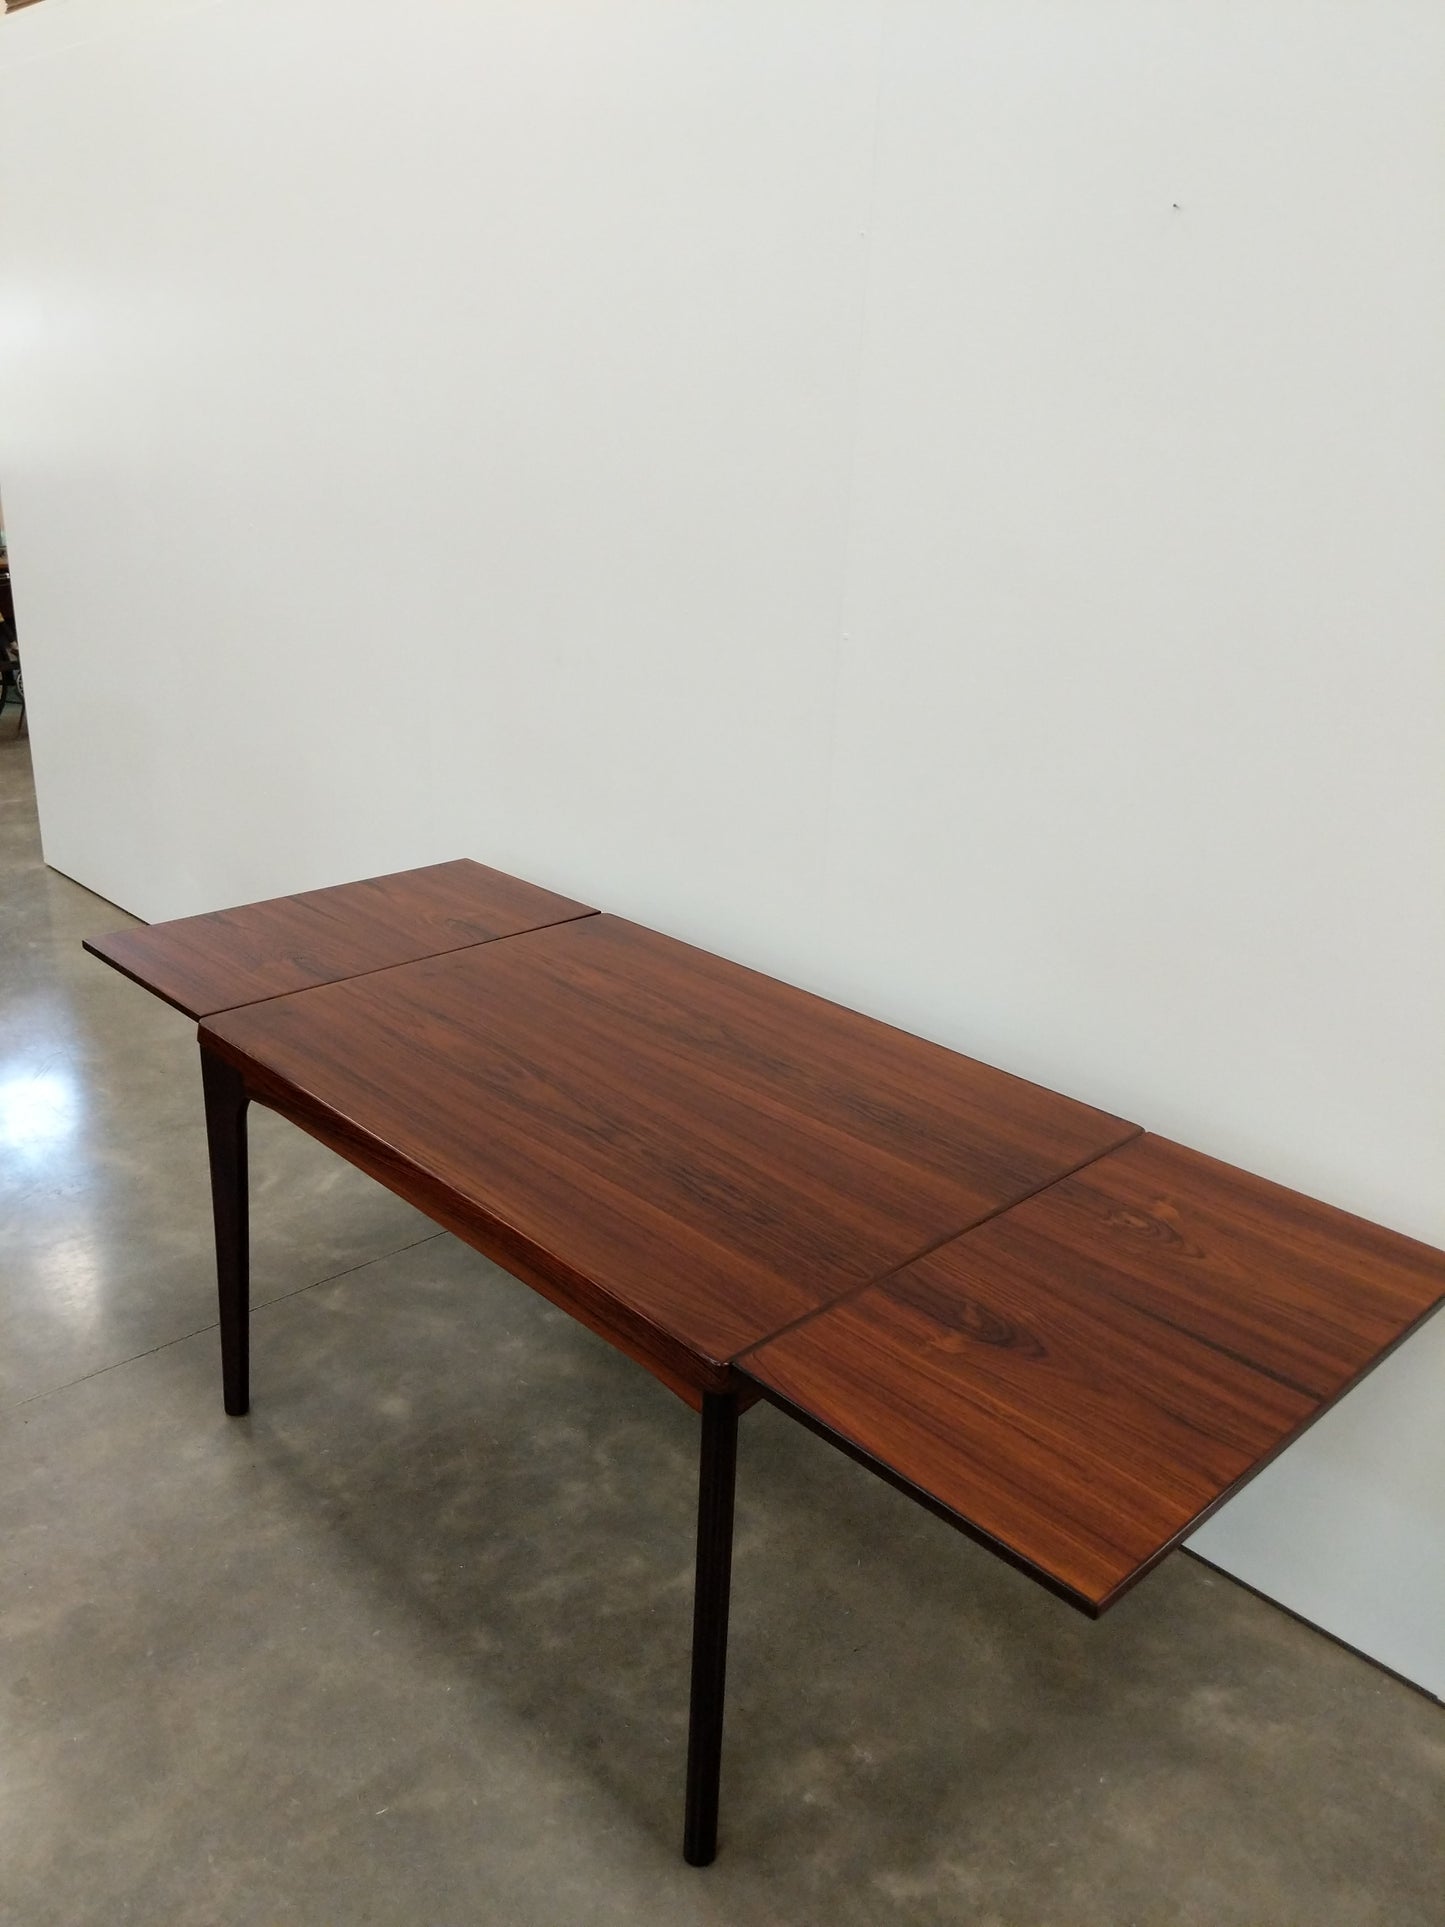 Vintage Danish Modern Rosewood Extendable Dining Table by Henning Kjaernulf